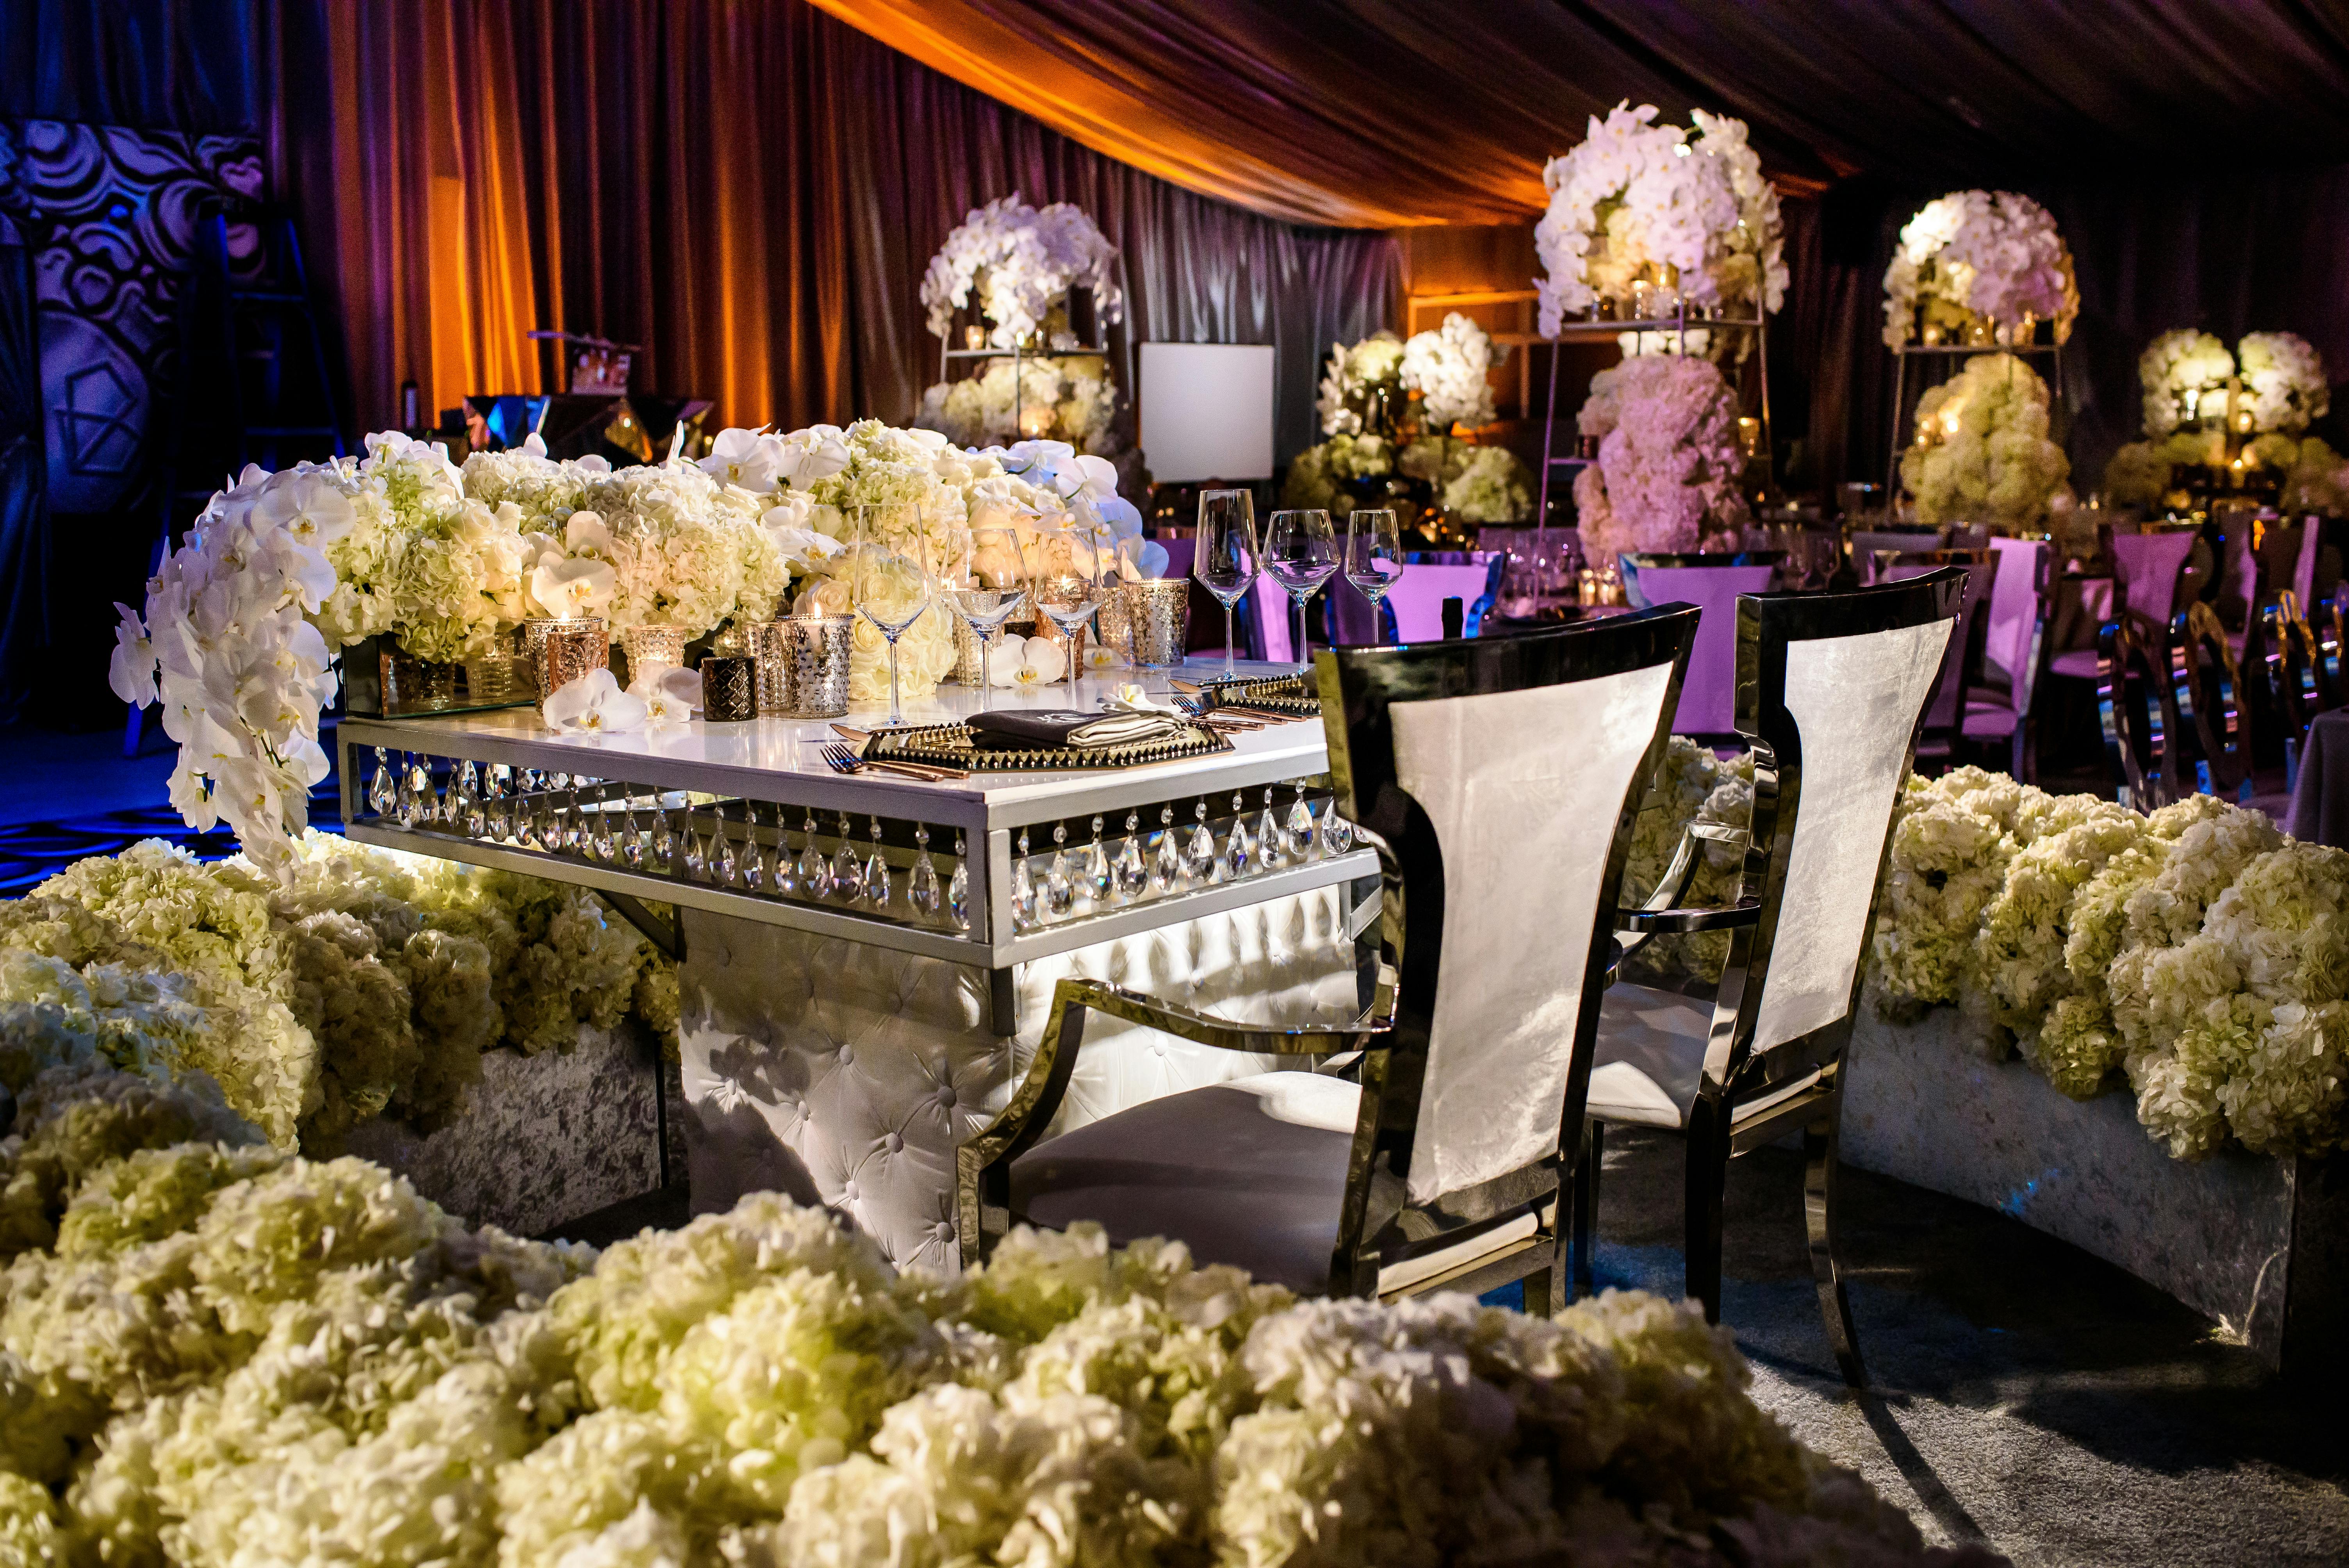 Sweetheart Table With with White Orchid and Hydrangea Wedding Centerpieces Surrounded by a Sea of White Hydrangeas